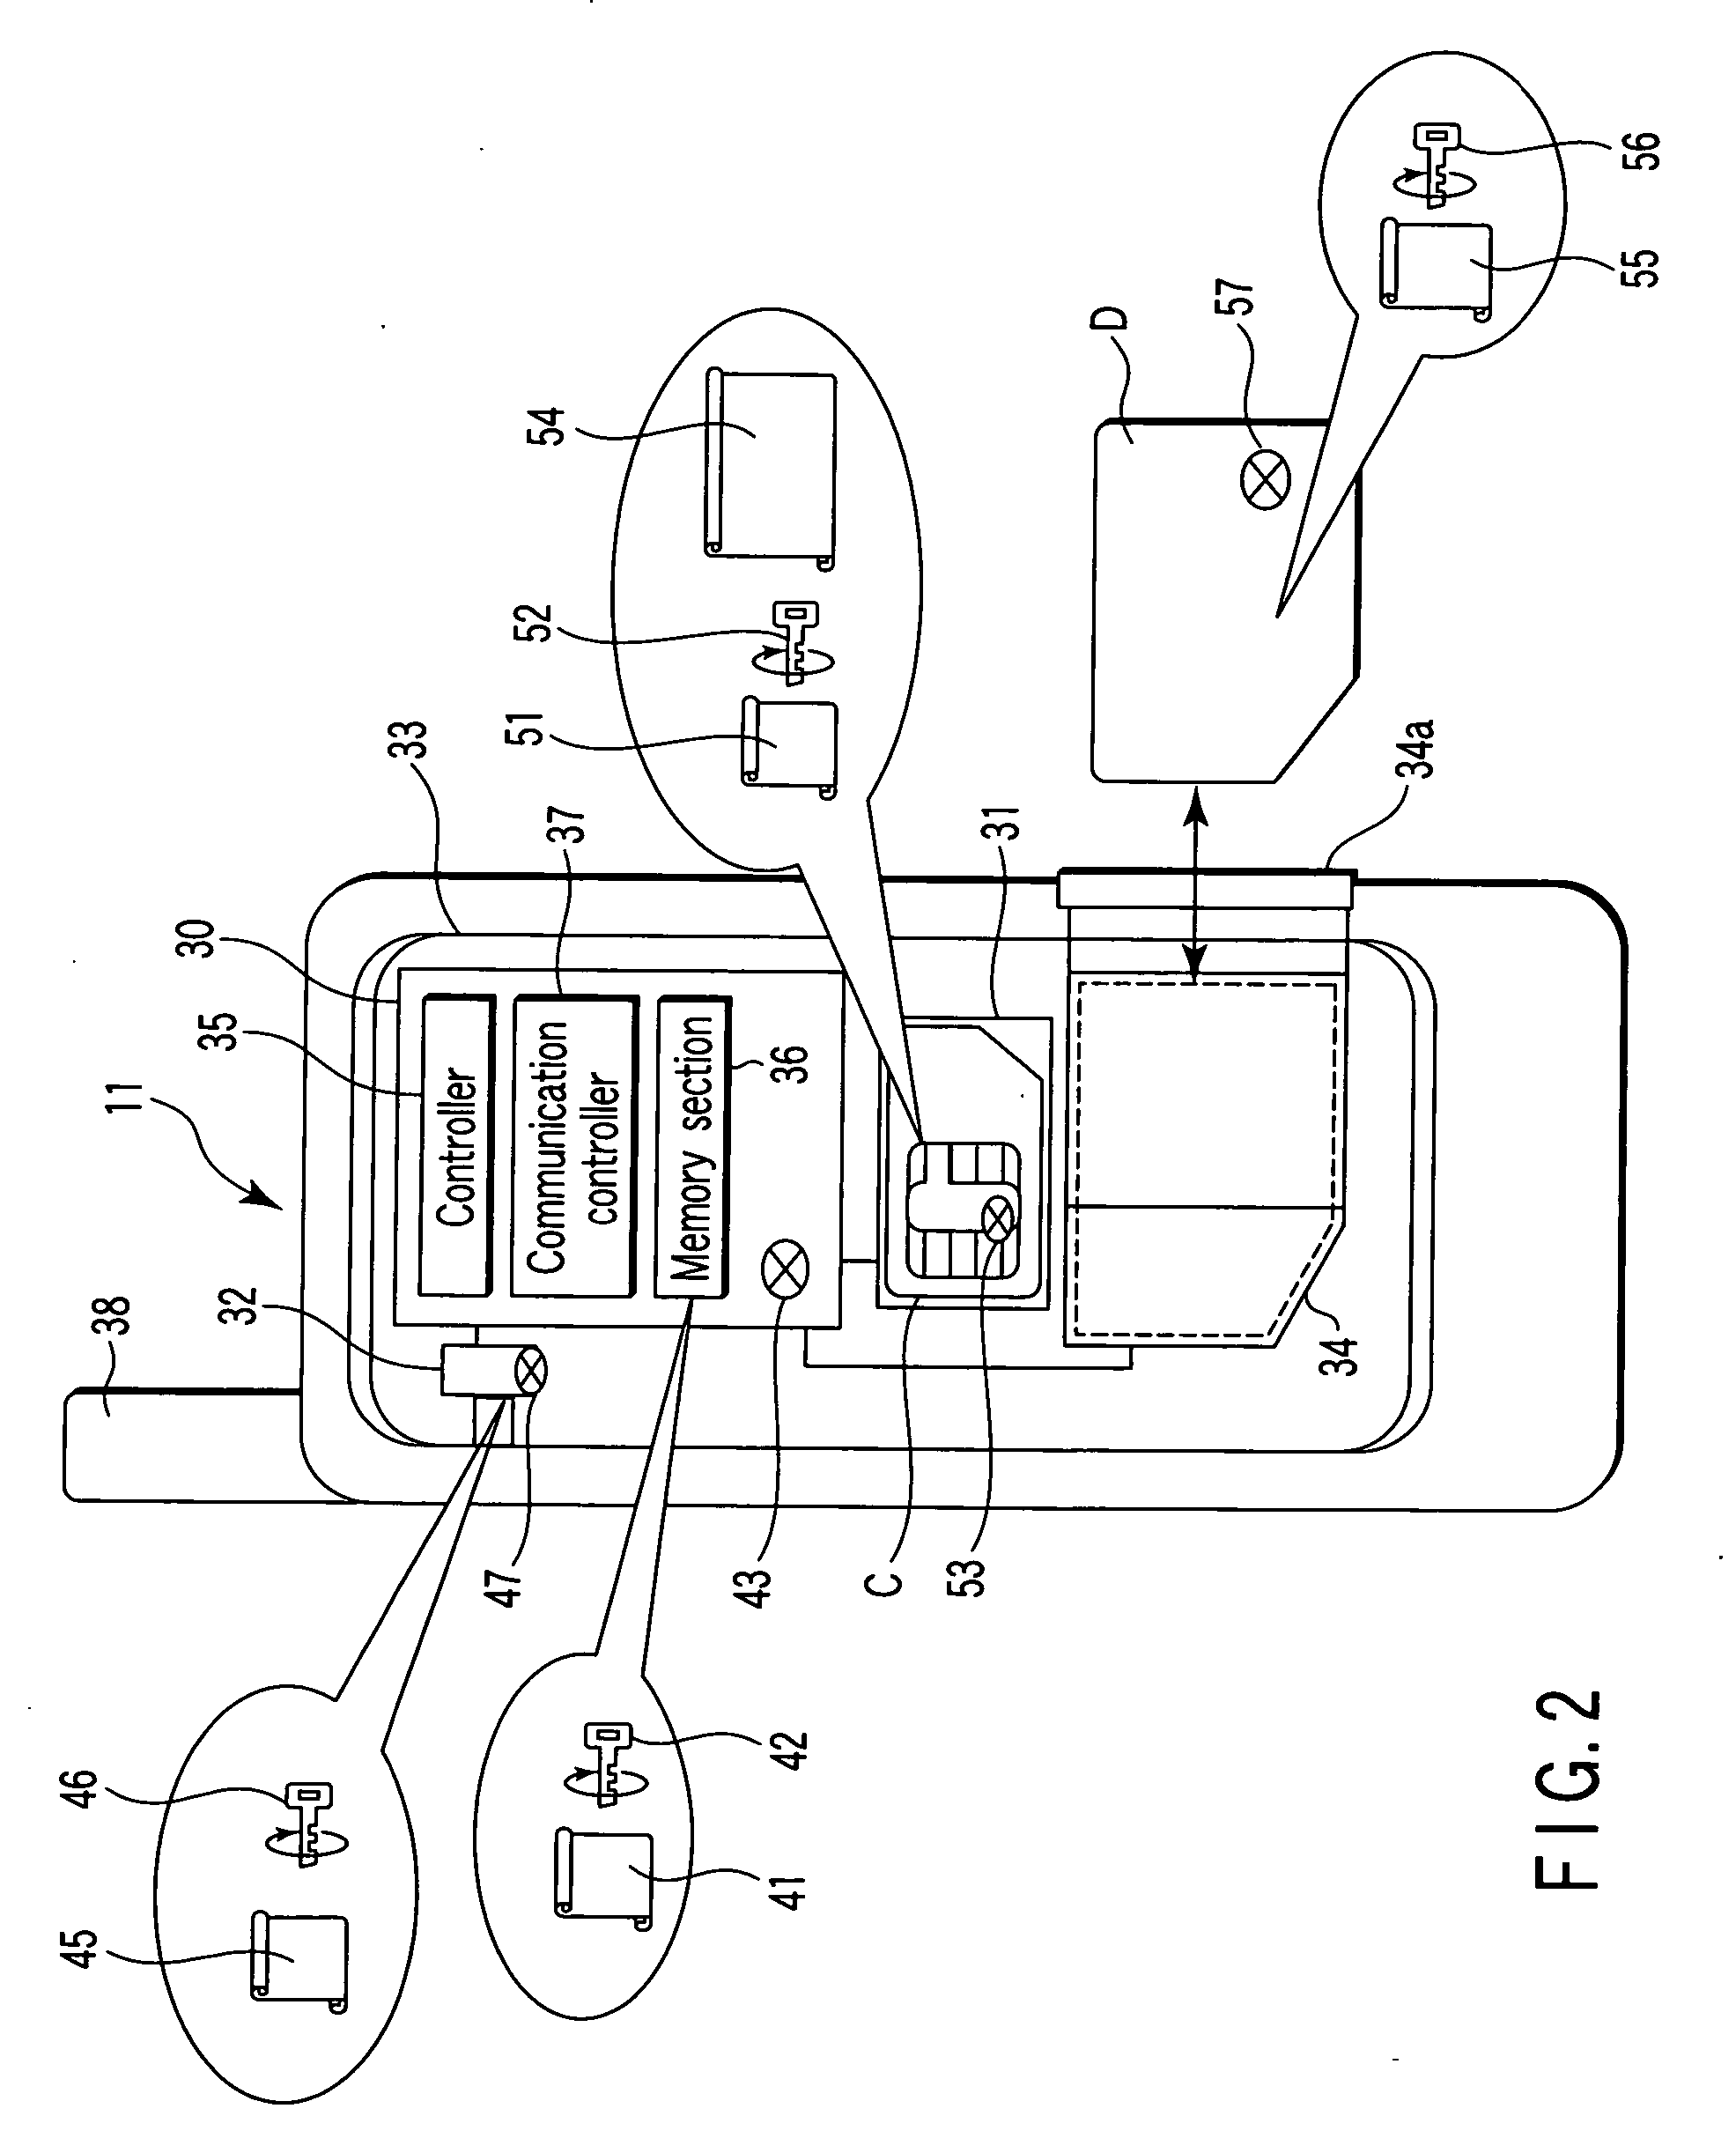 Electronic device mounted on terminal equipment